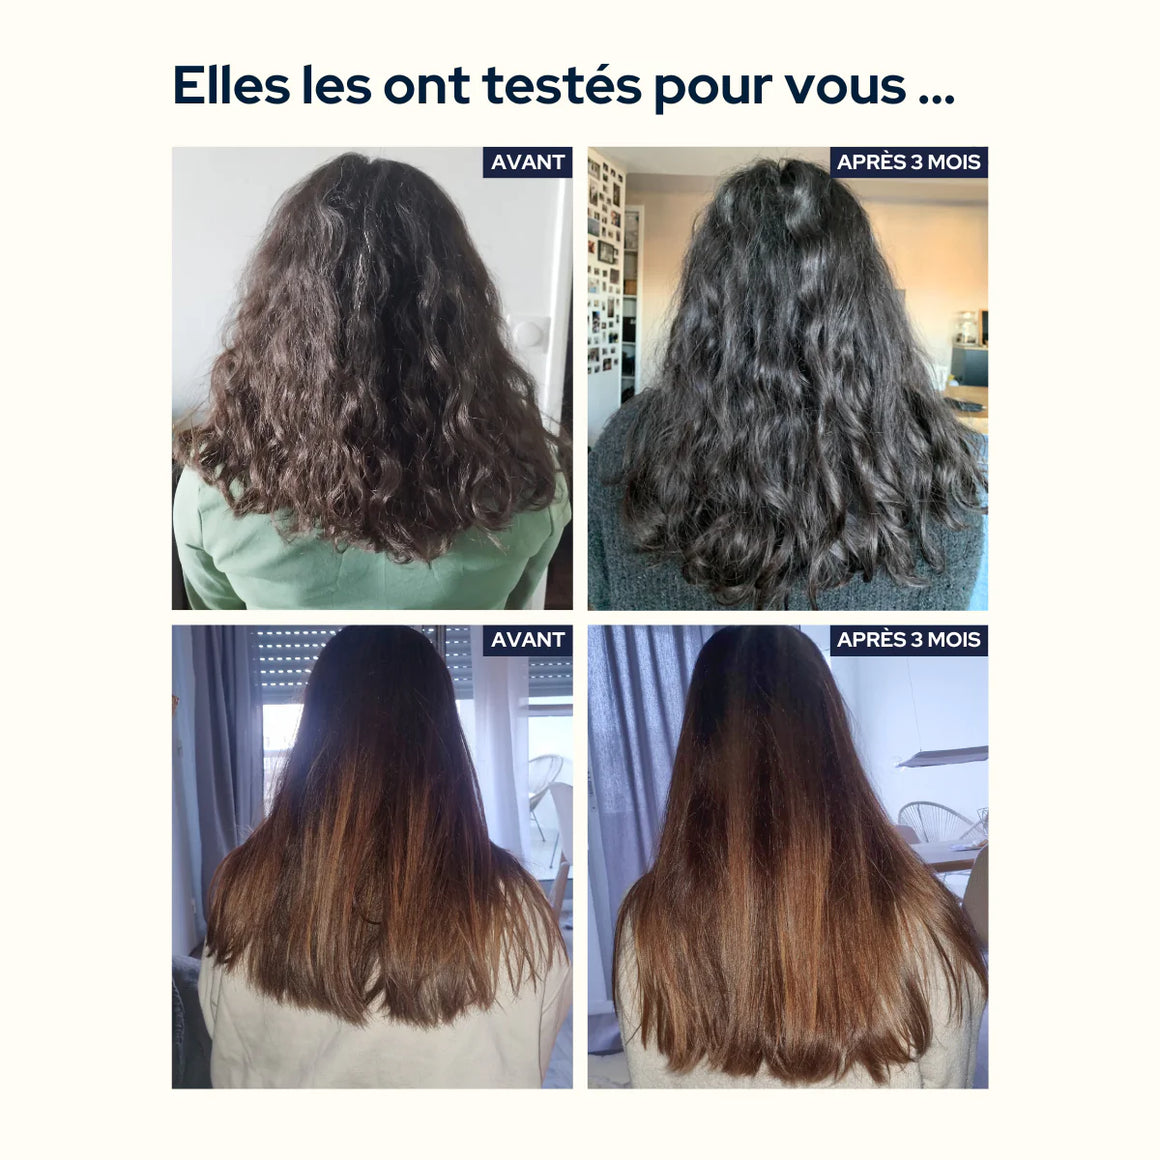 Hair & Nail Gummies - 1 month by Epycure before and after